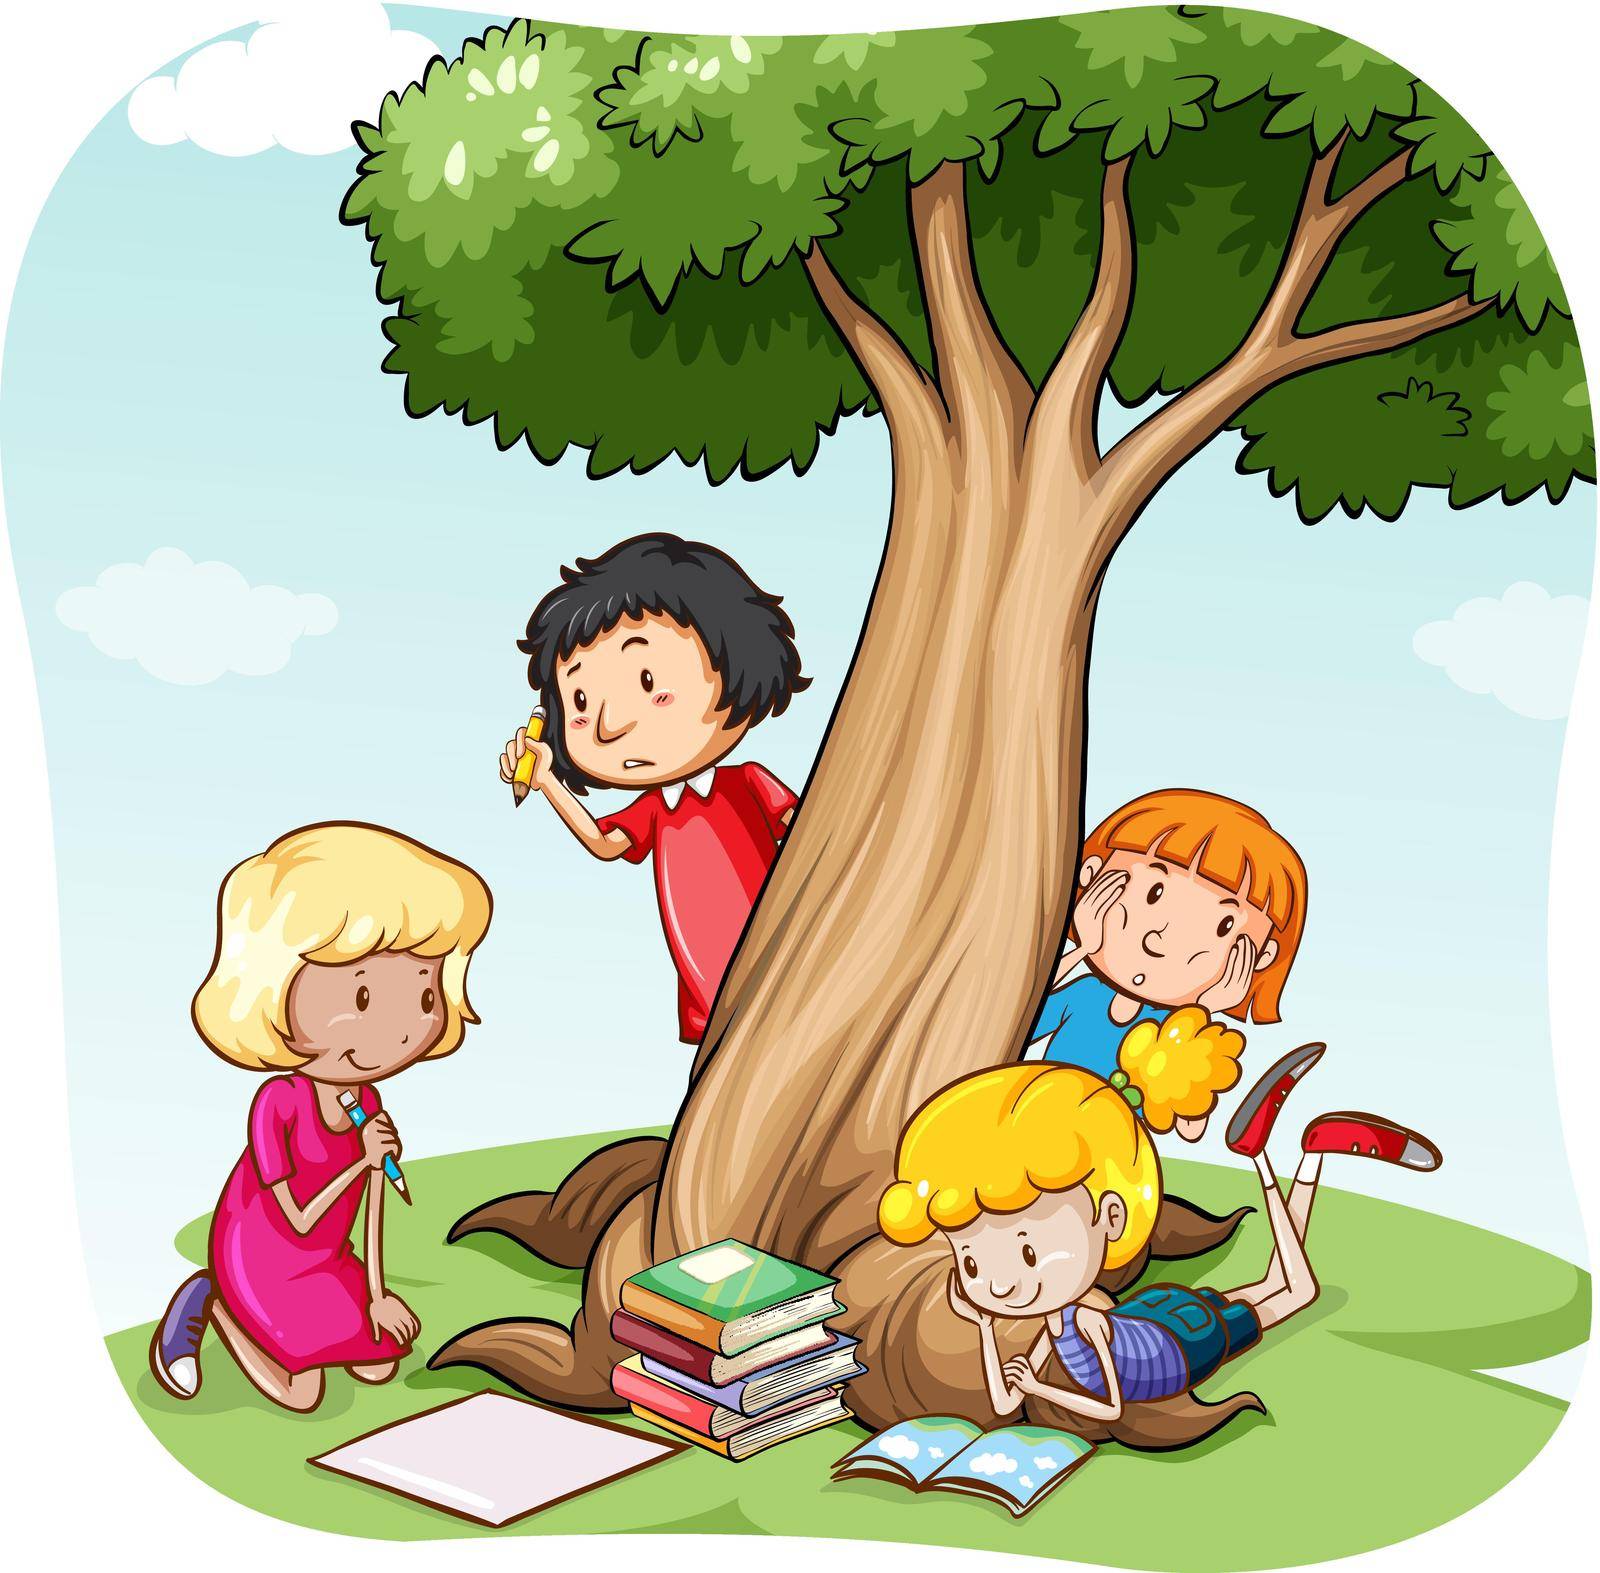 Children reading and writing under the tree